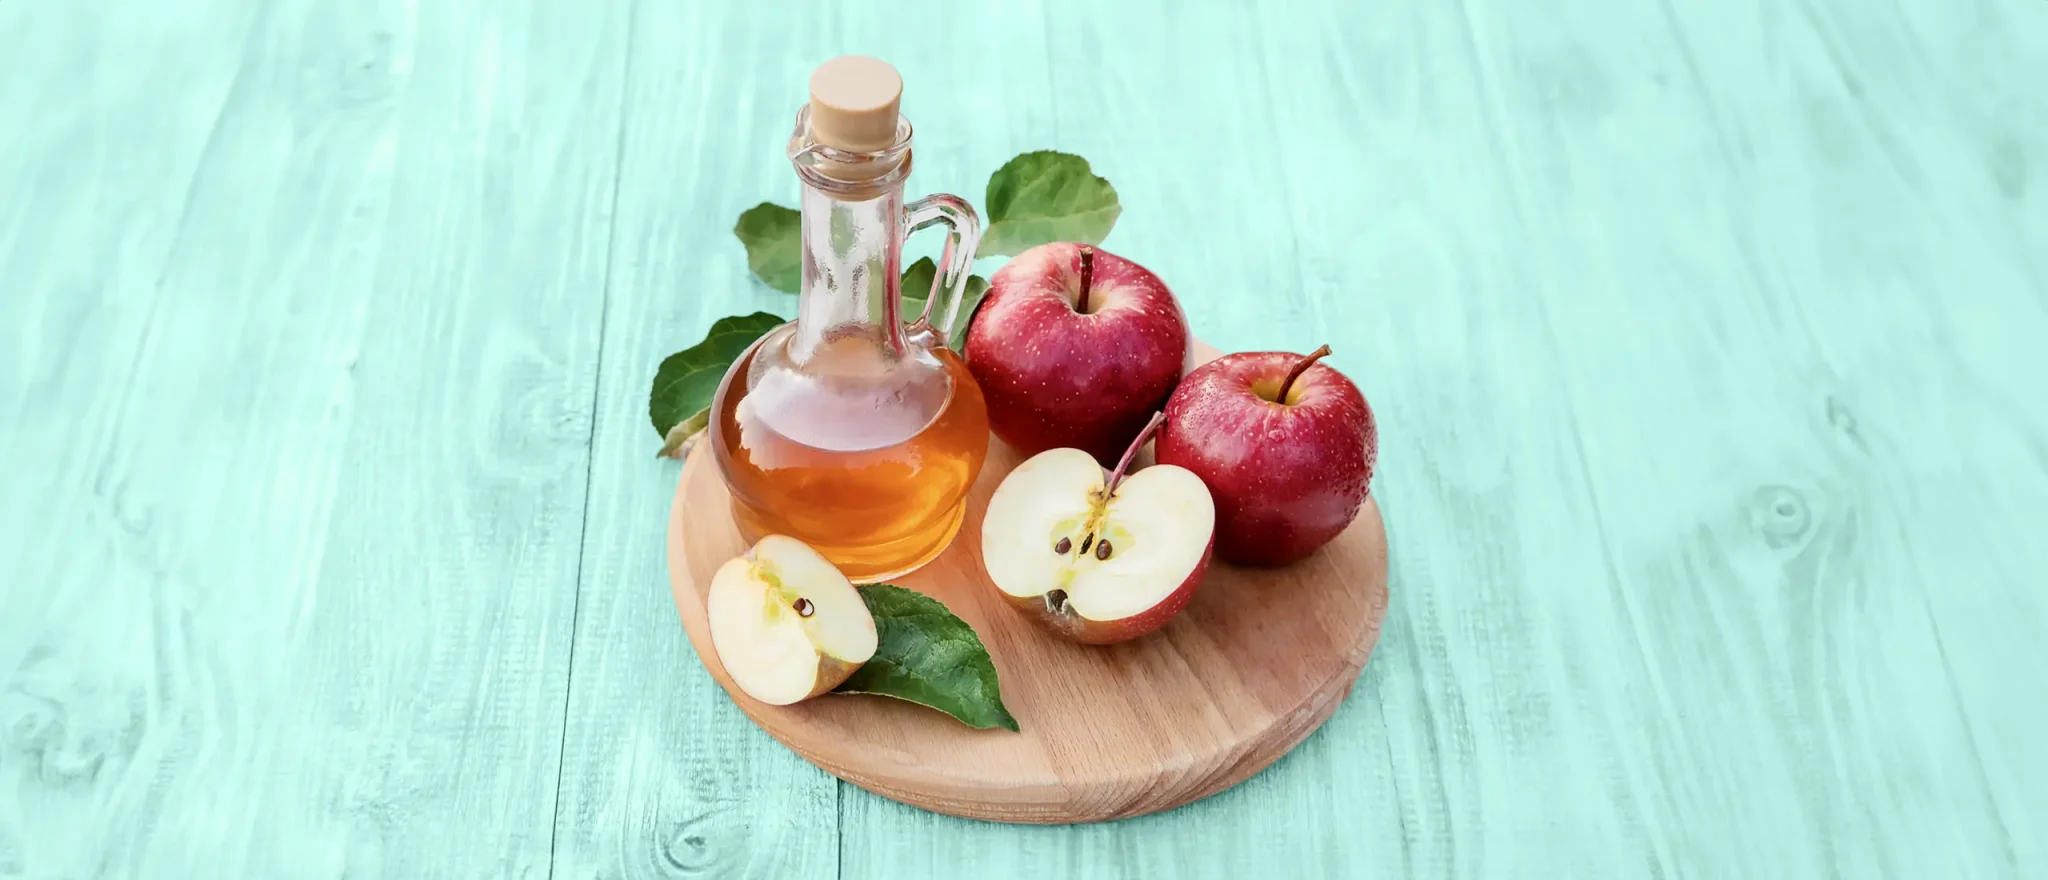 Does Apple Cider Vinegar Break a Fast? Not If You Do This